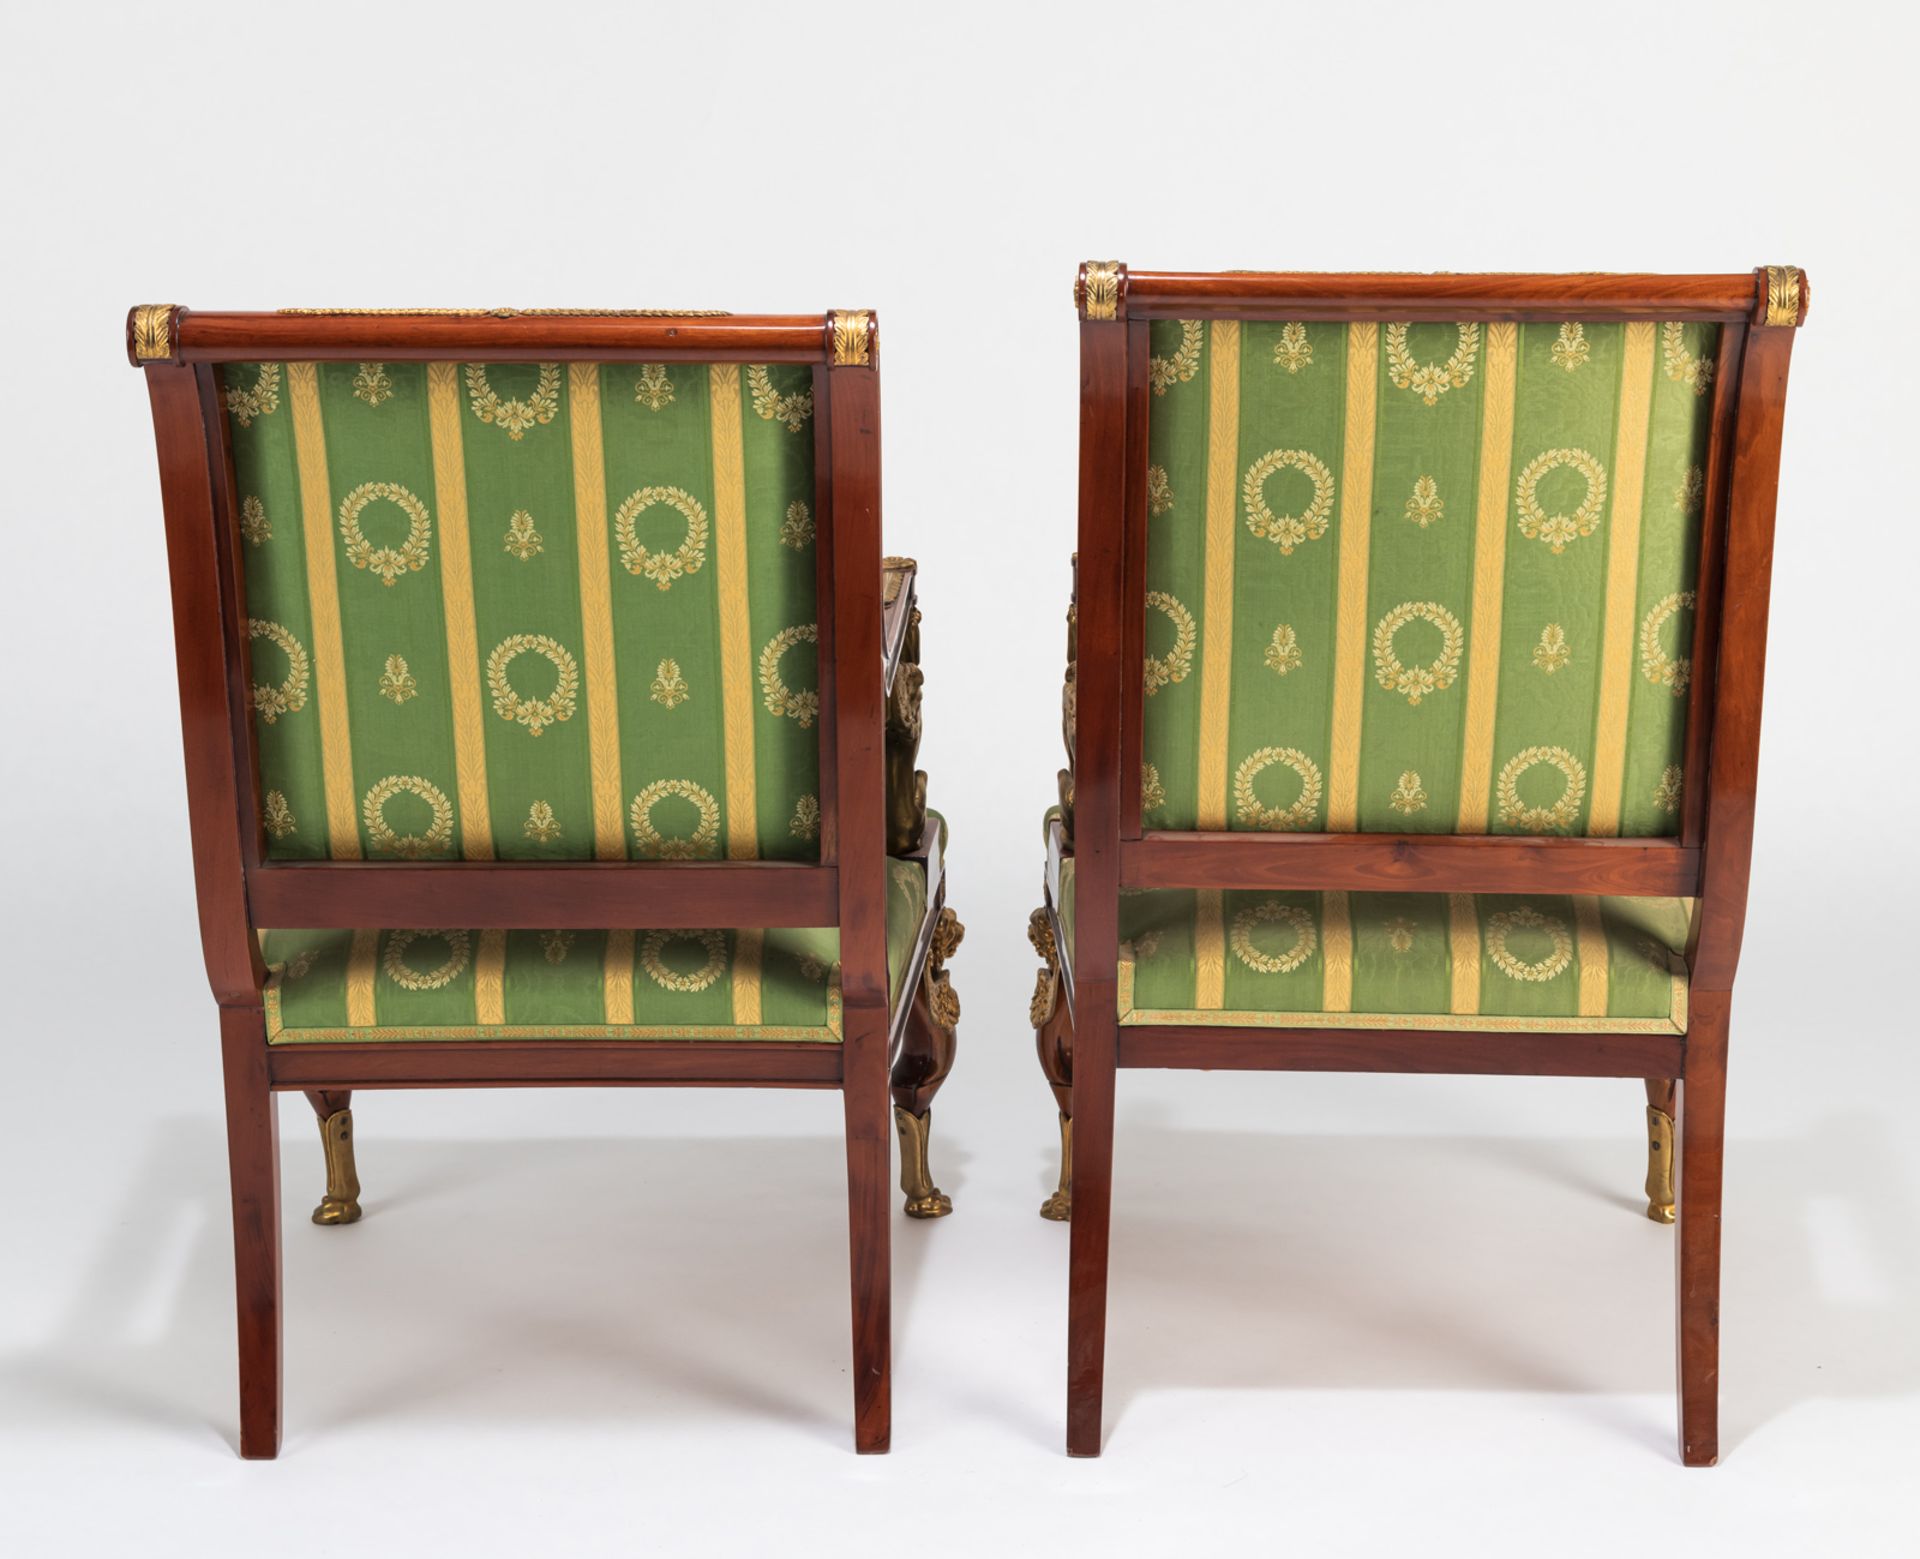 A PAIR OF NEOCLASSICAL ORMOLU MOUNTED MAHOGANY FAUTEUILS WITH SPHINX - Image 11 of 12